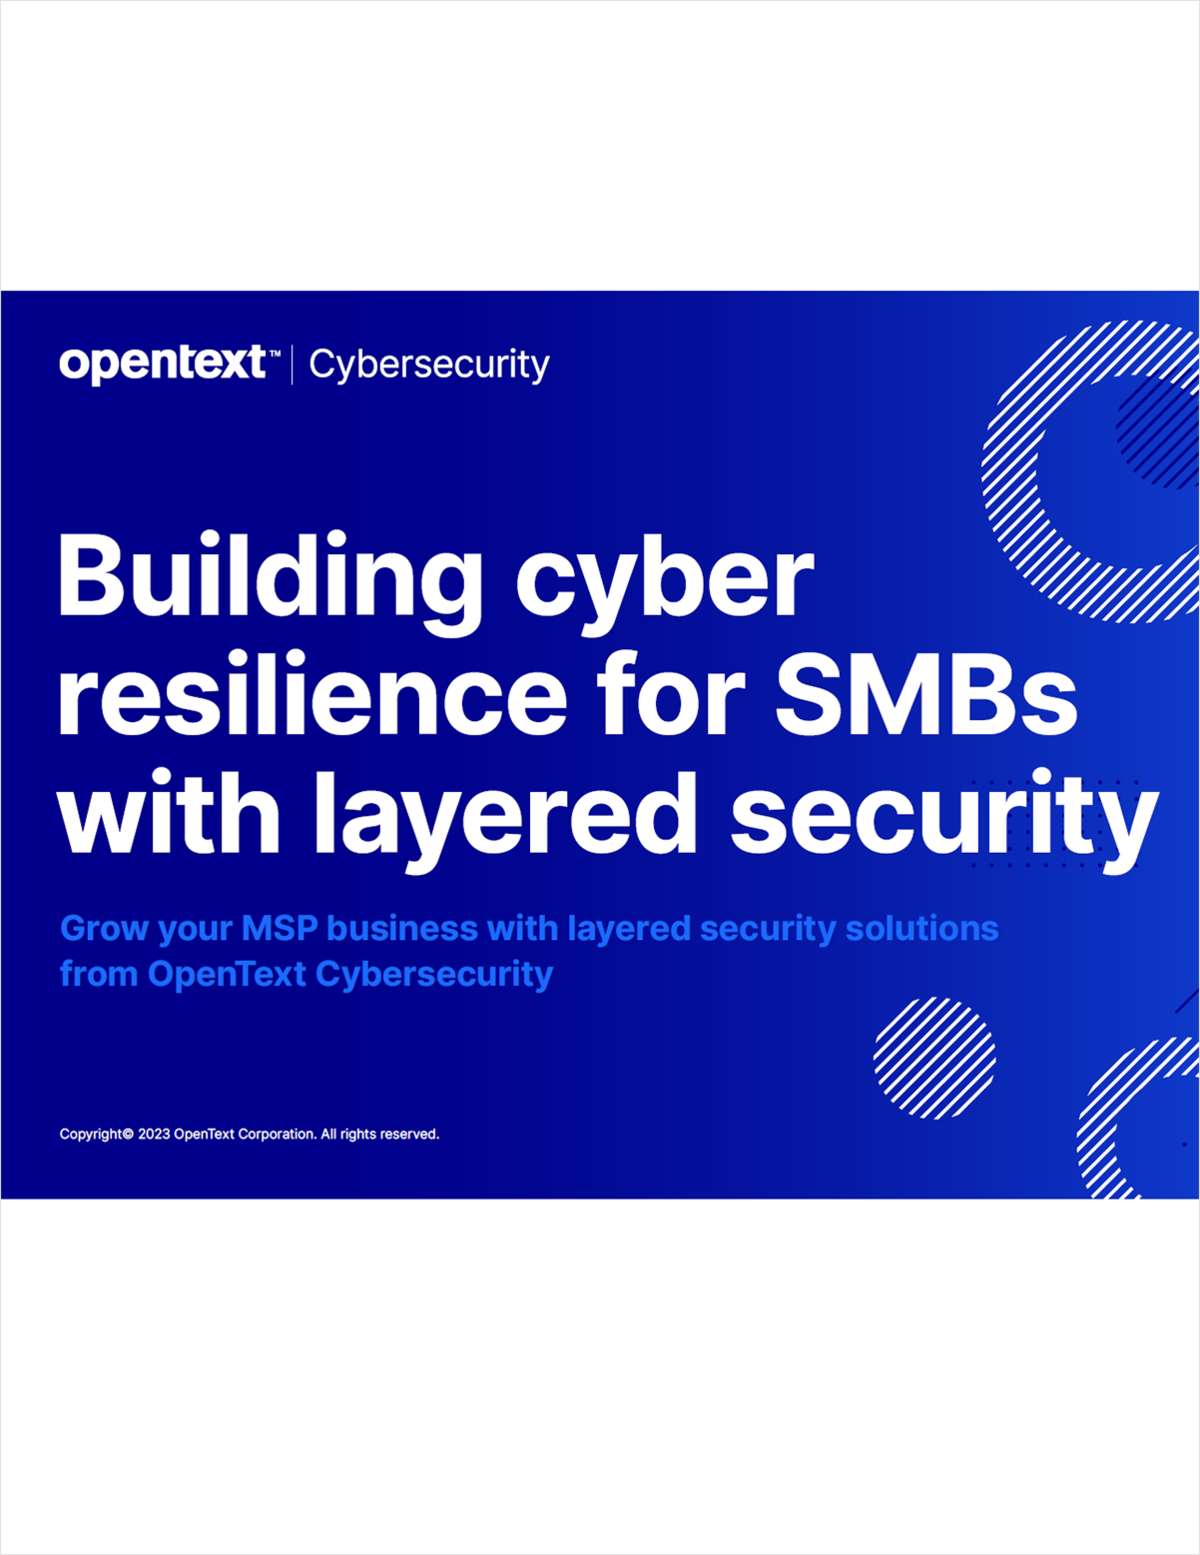 Building cyber resilience for SMBs with layered security